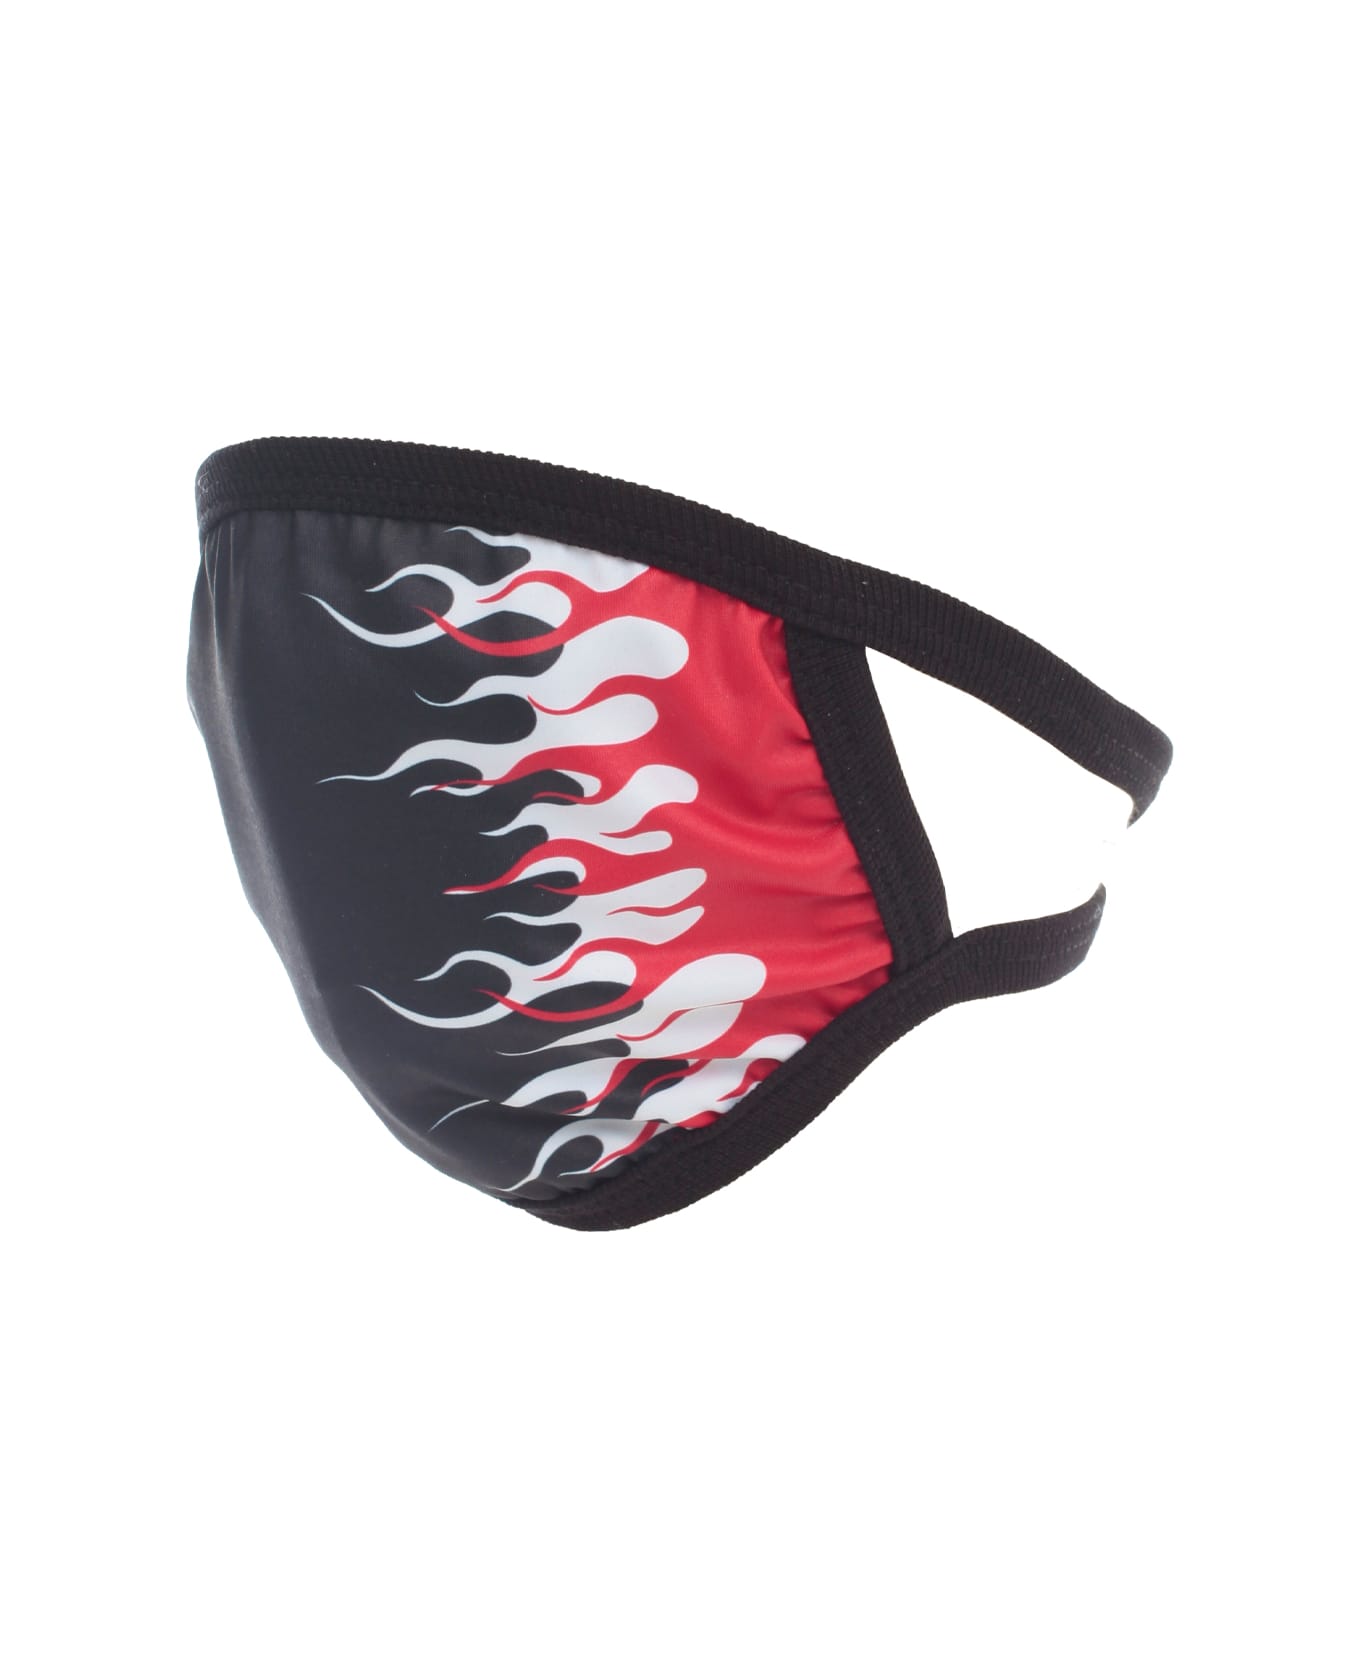 Vision of Super Double Flame Face Mask